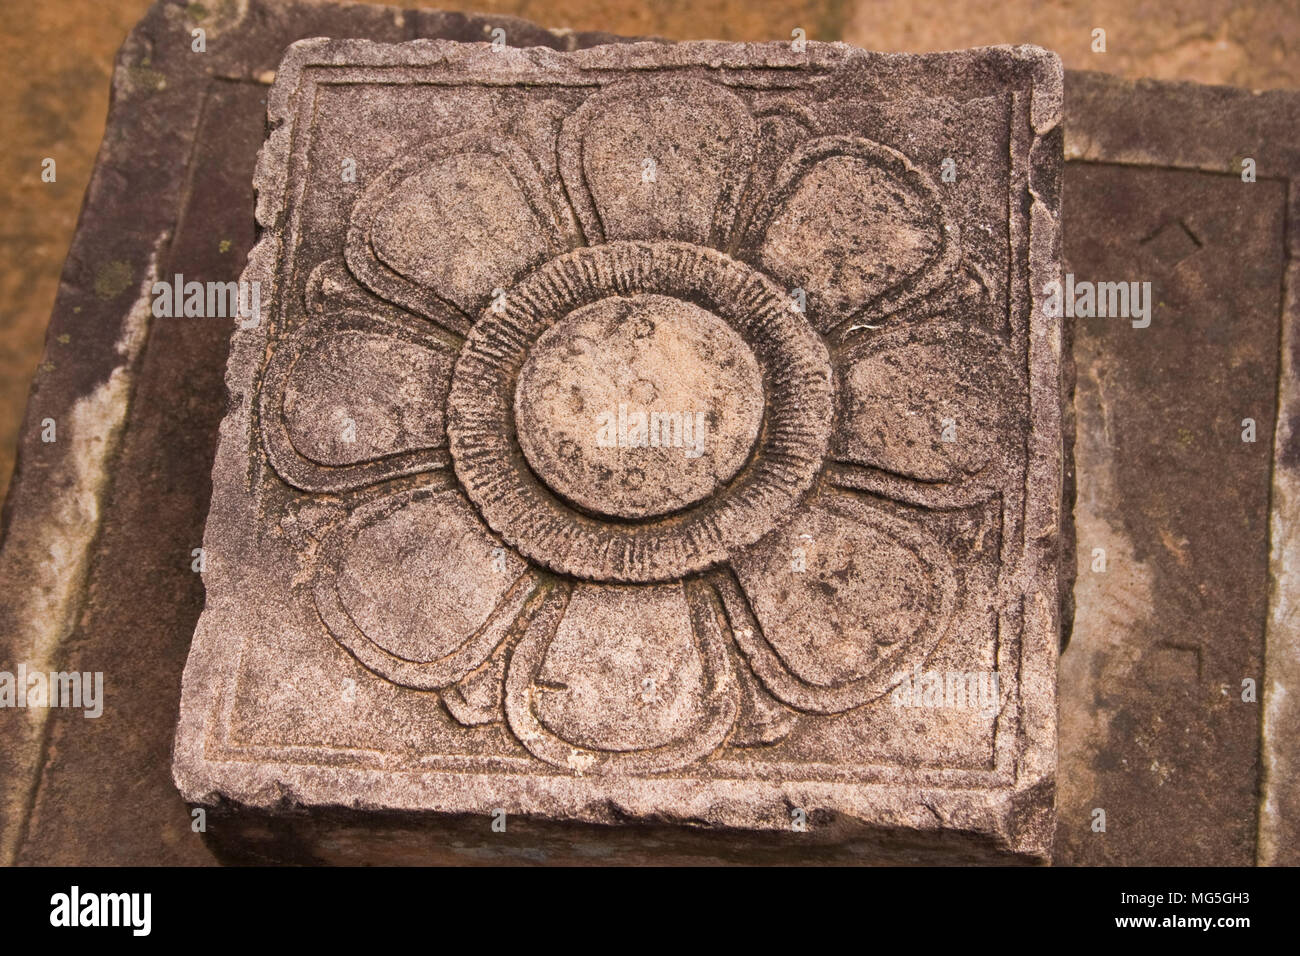 Close-up of a lotus flower carving on a square red sandstone, often found in Khmer temples. It is a remain of a Shiva Linga in Cambodia's Banteay Srei. Stock Photo